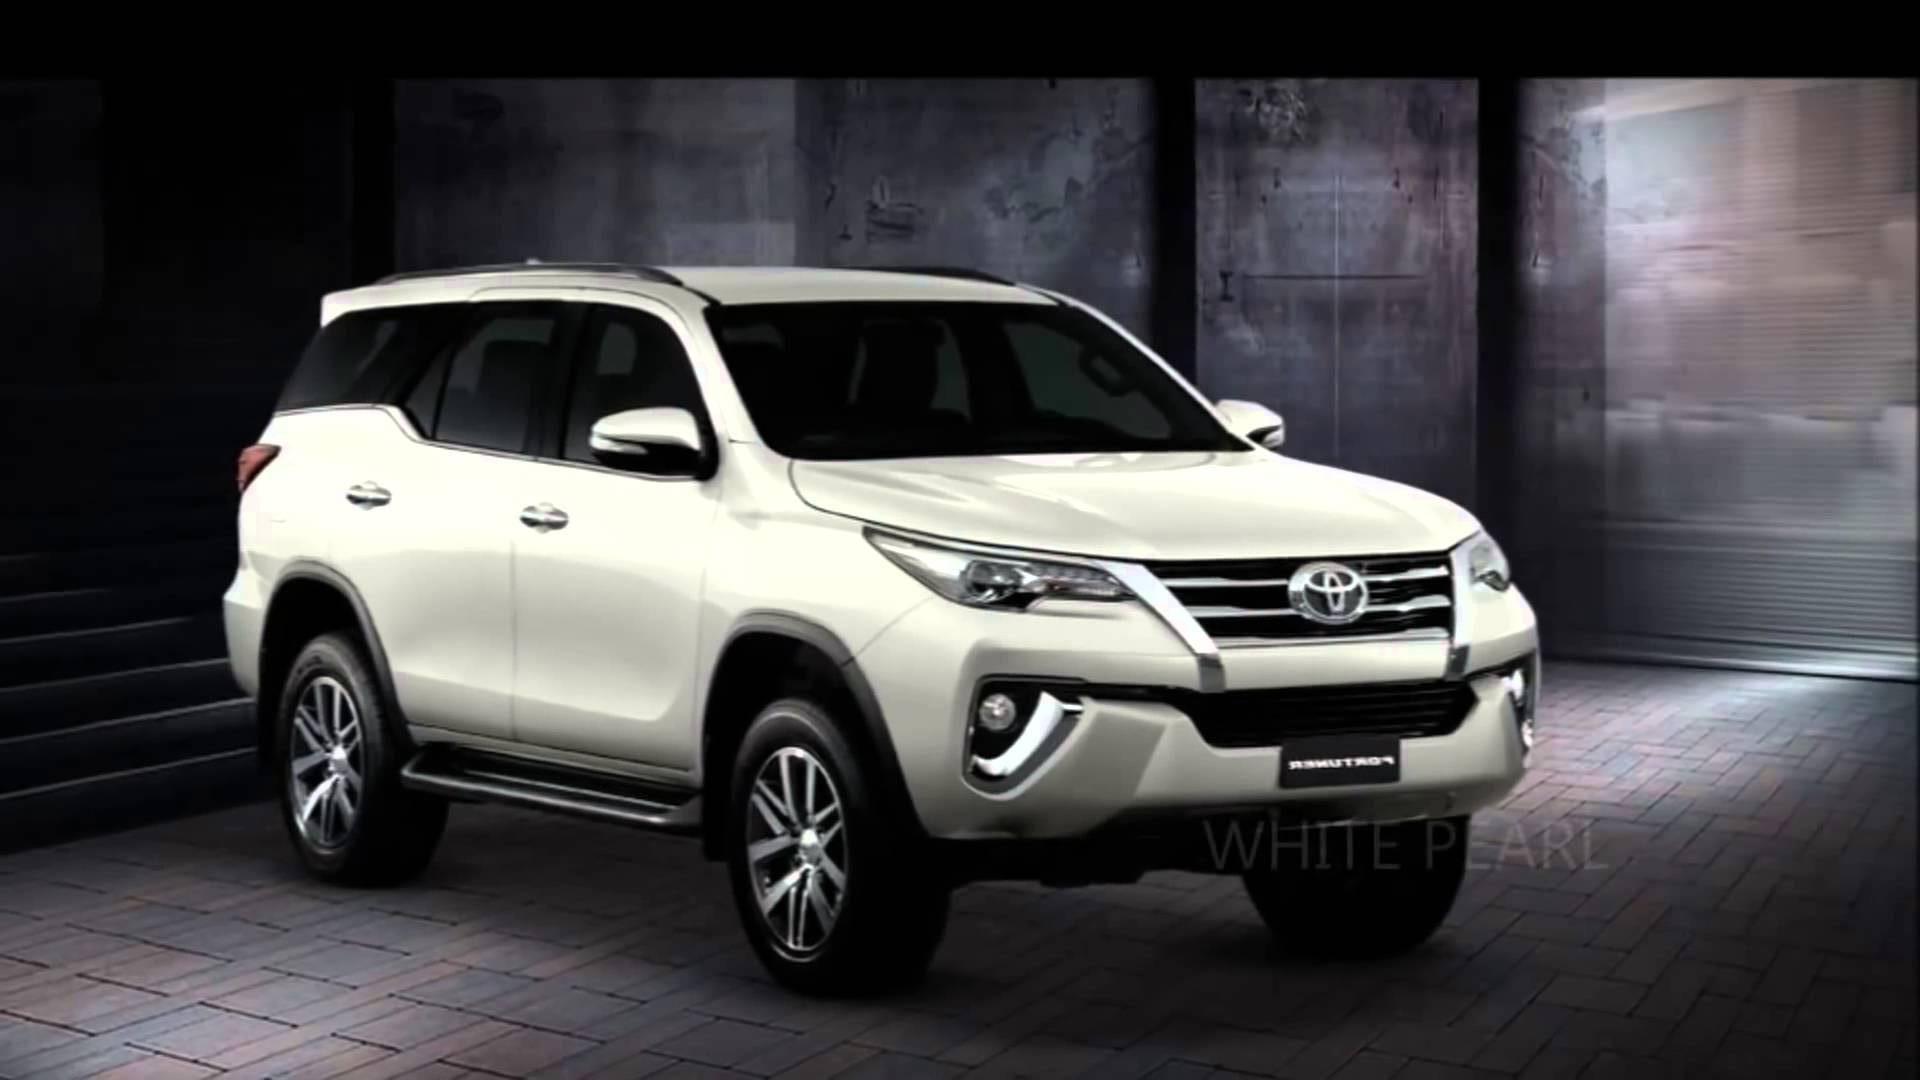 Fortuner Car Hd Images   Toyota Fortuner Wallpaper Hd 1920x1080